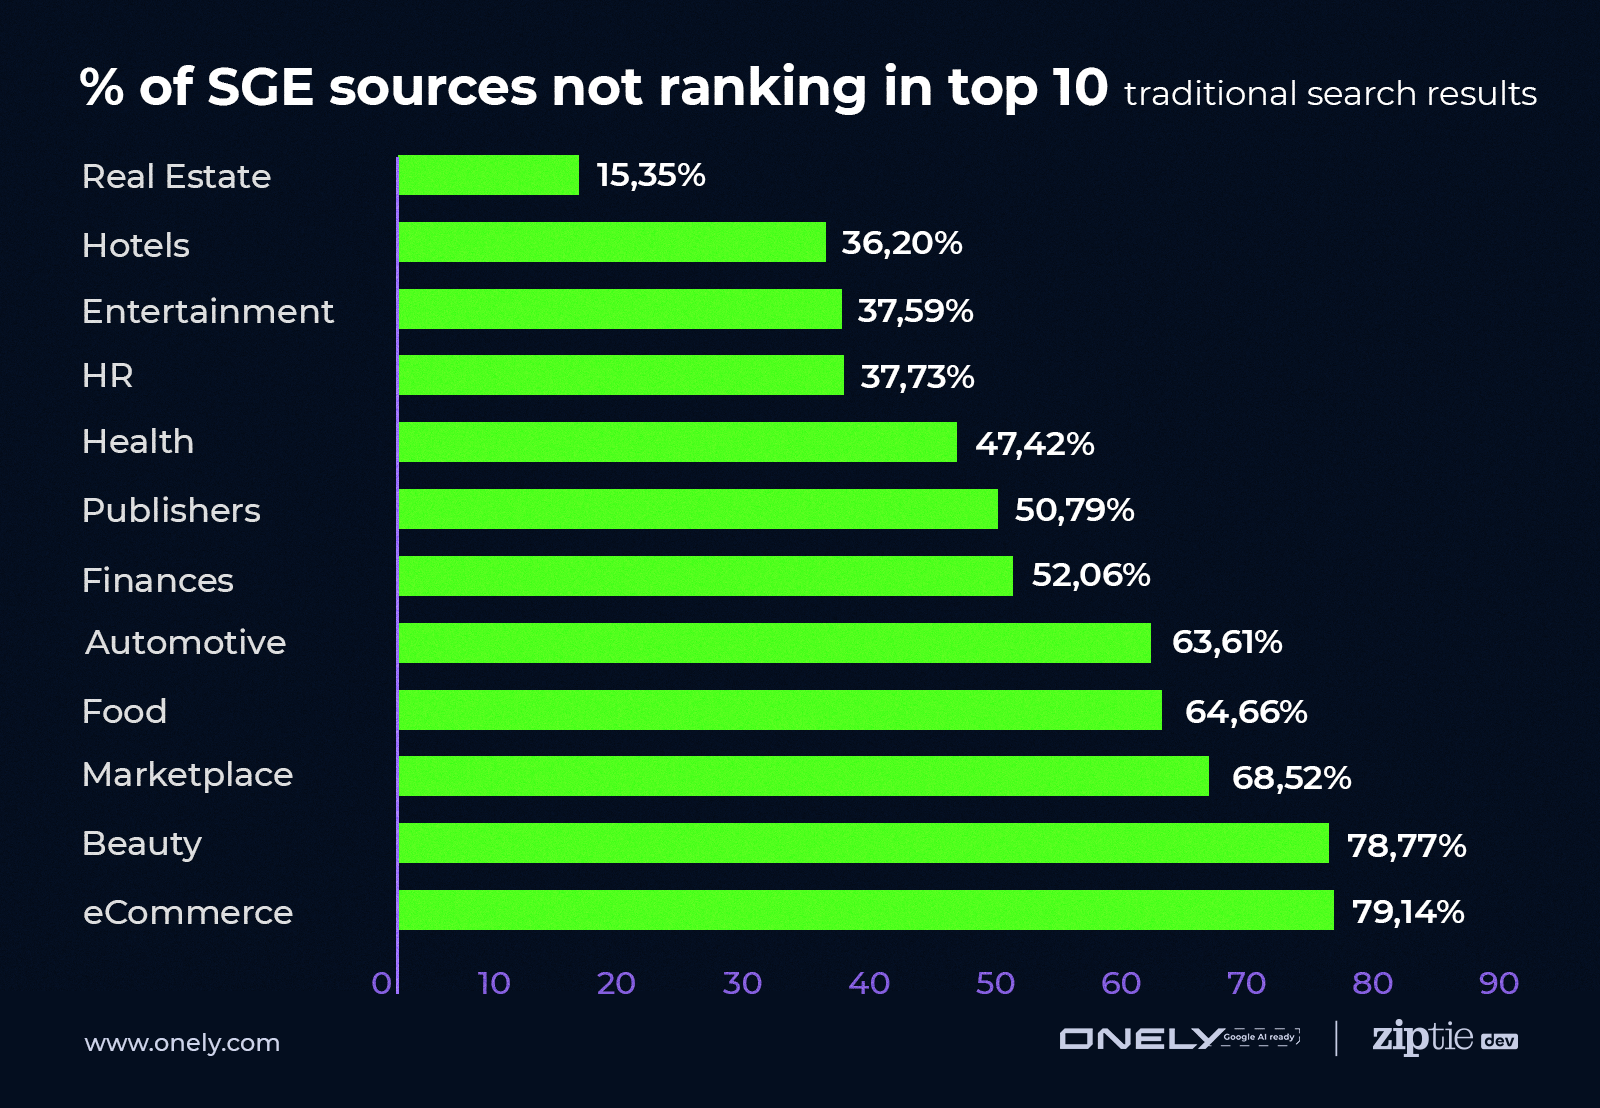 verticals impacted the most by google sge sources in top 10 15 - Google SGE Organic Traffic Impact Divided By Verticals [Data Study]